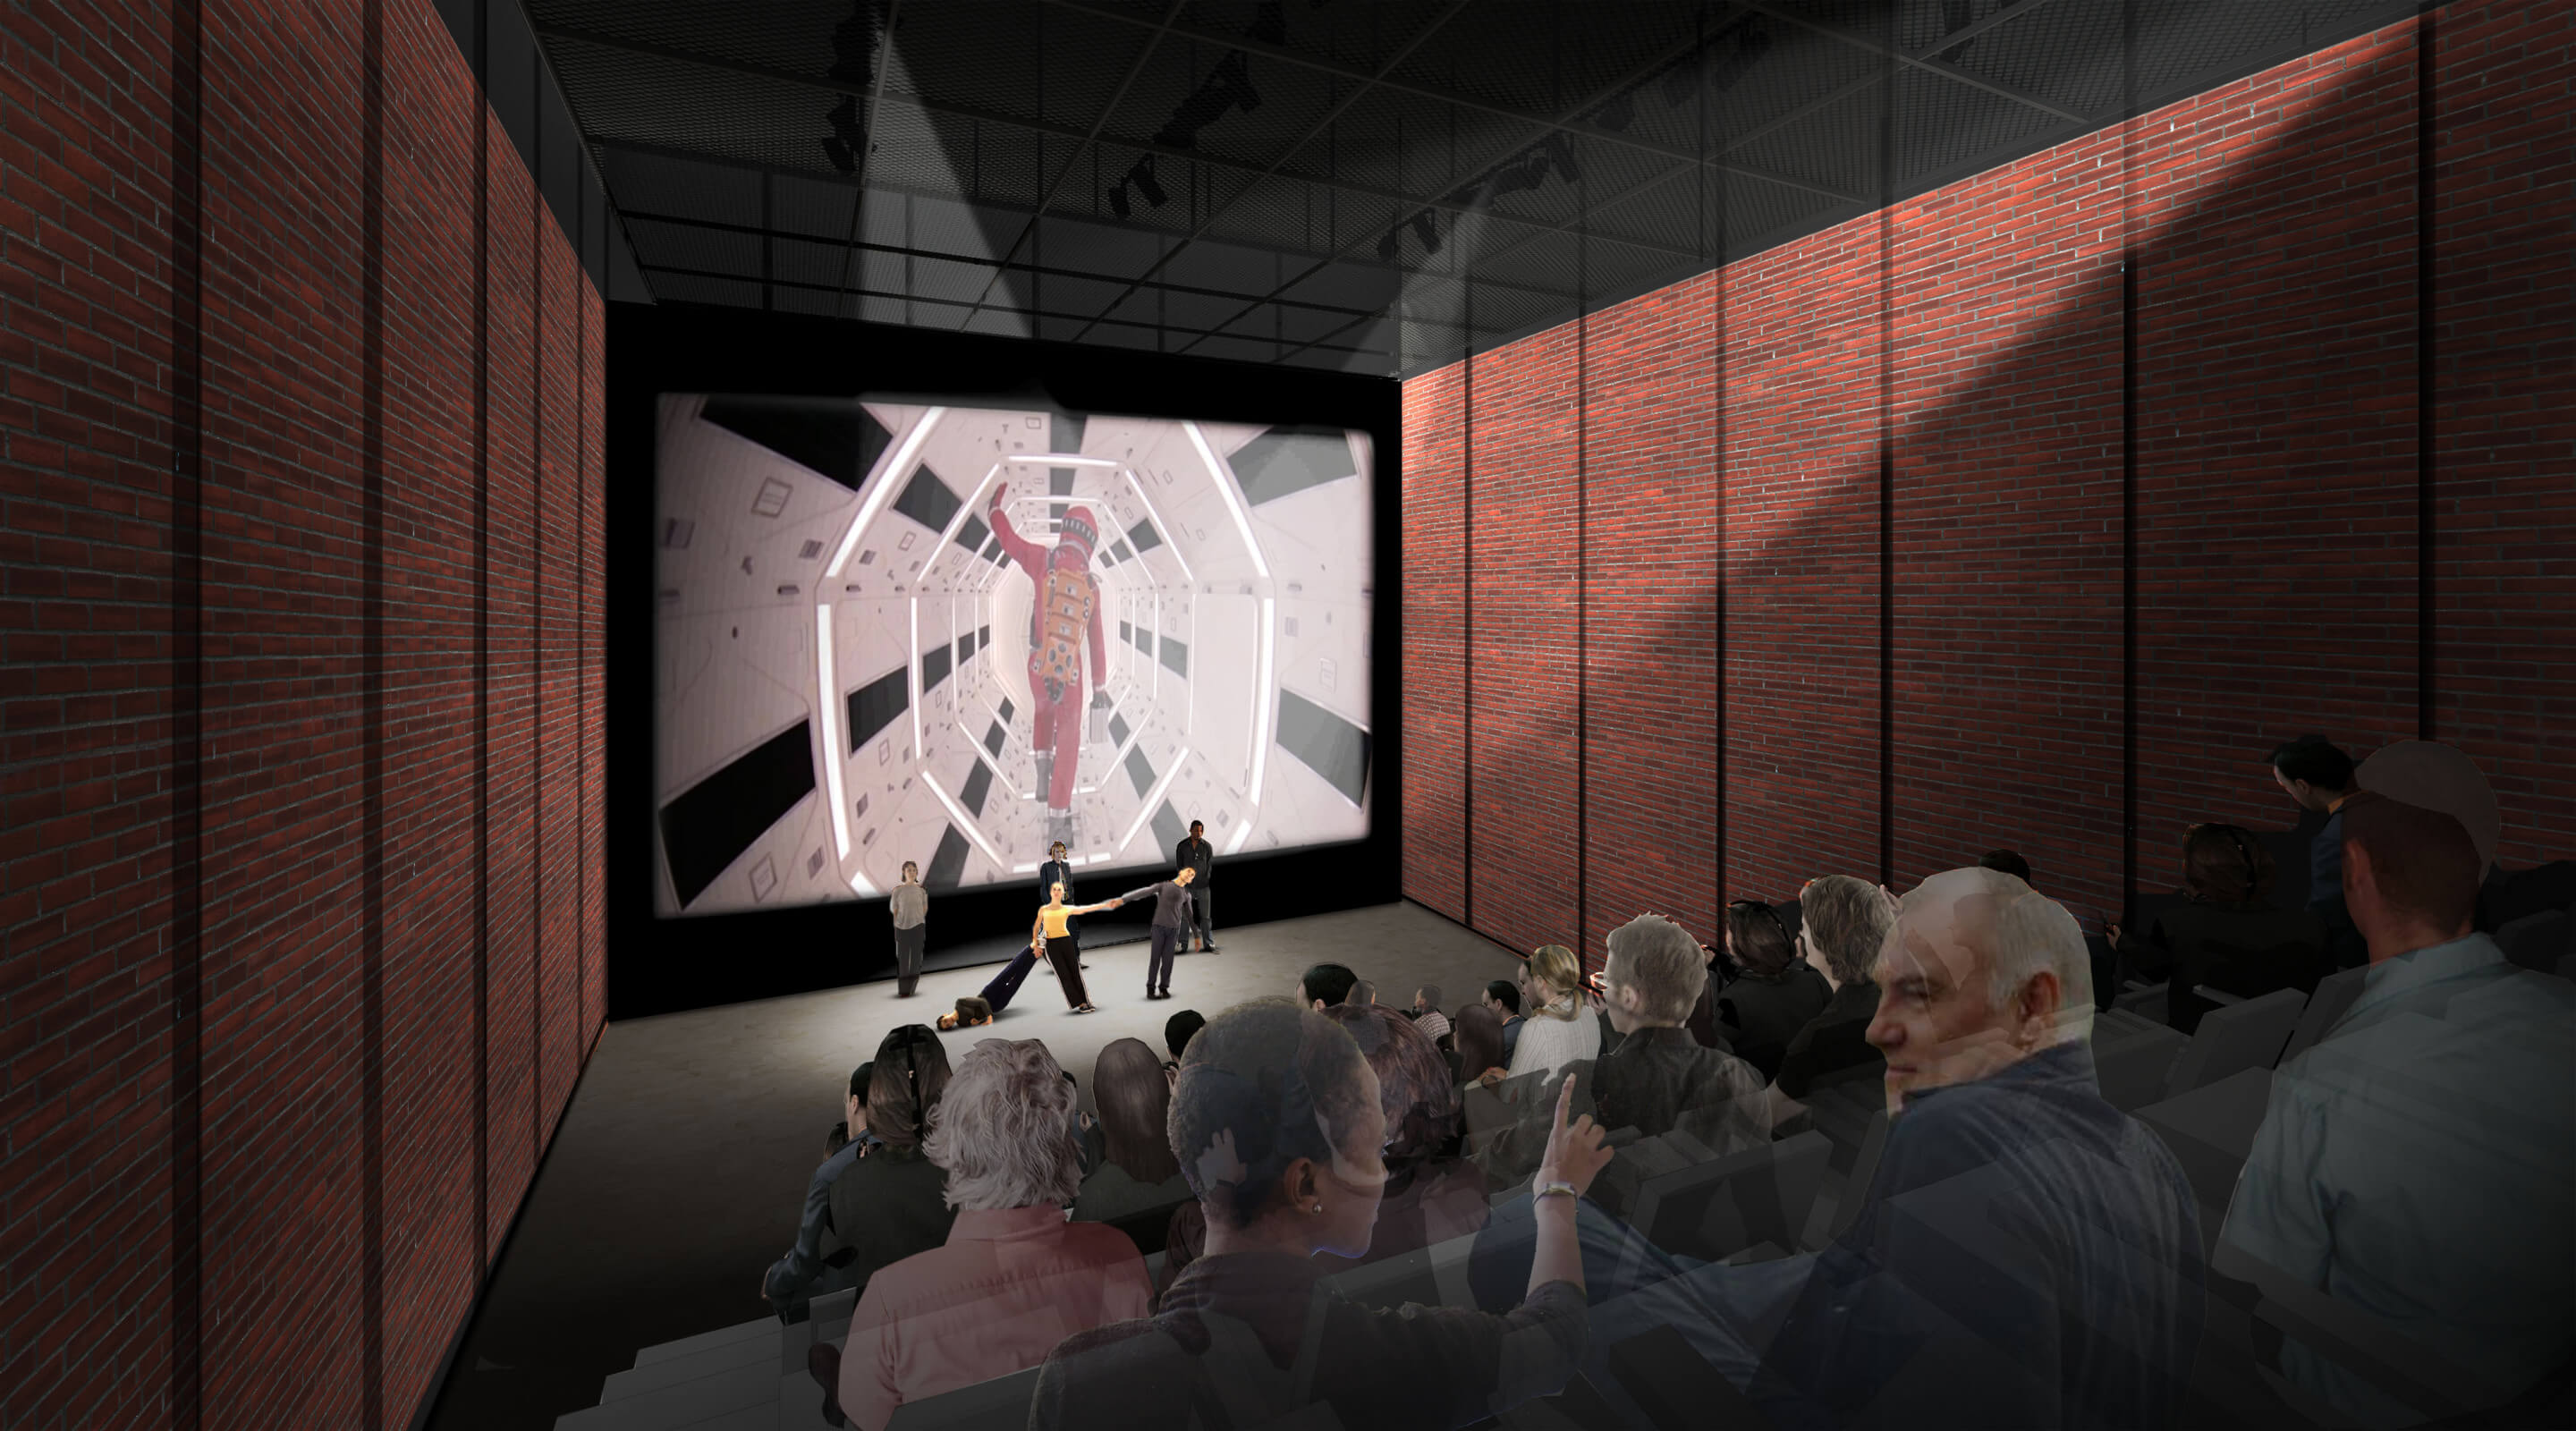 rendering of an audience in a large theater space